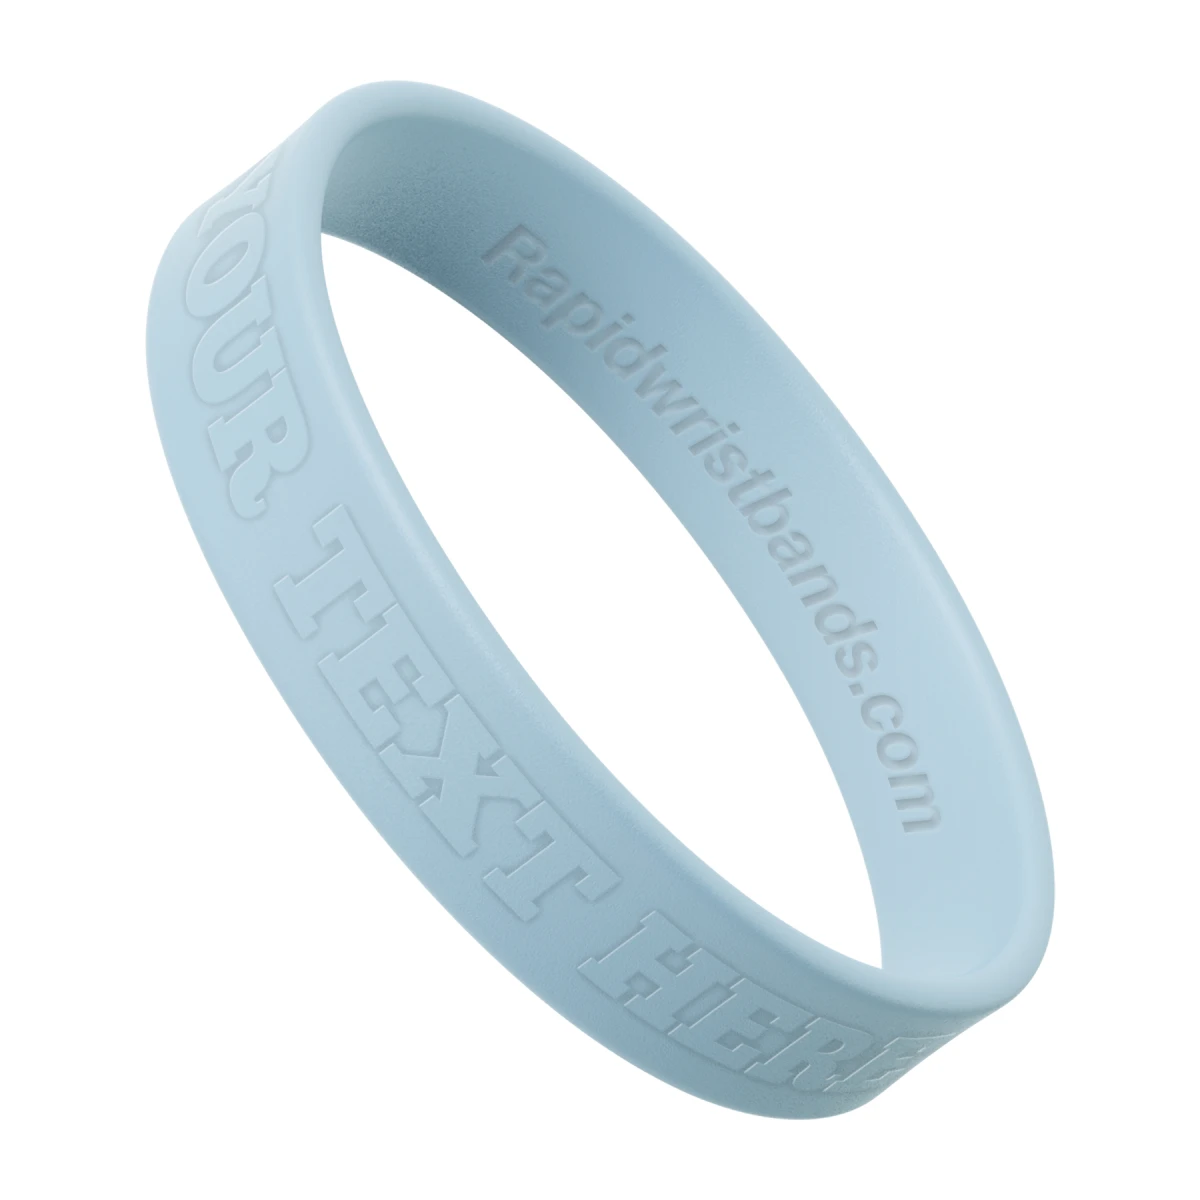 Pearl Blue Wristband With Your Text Here Embossed